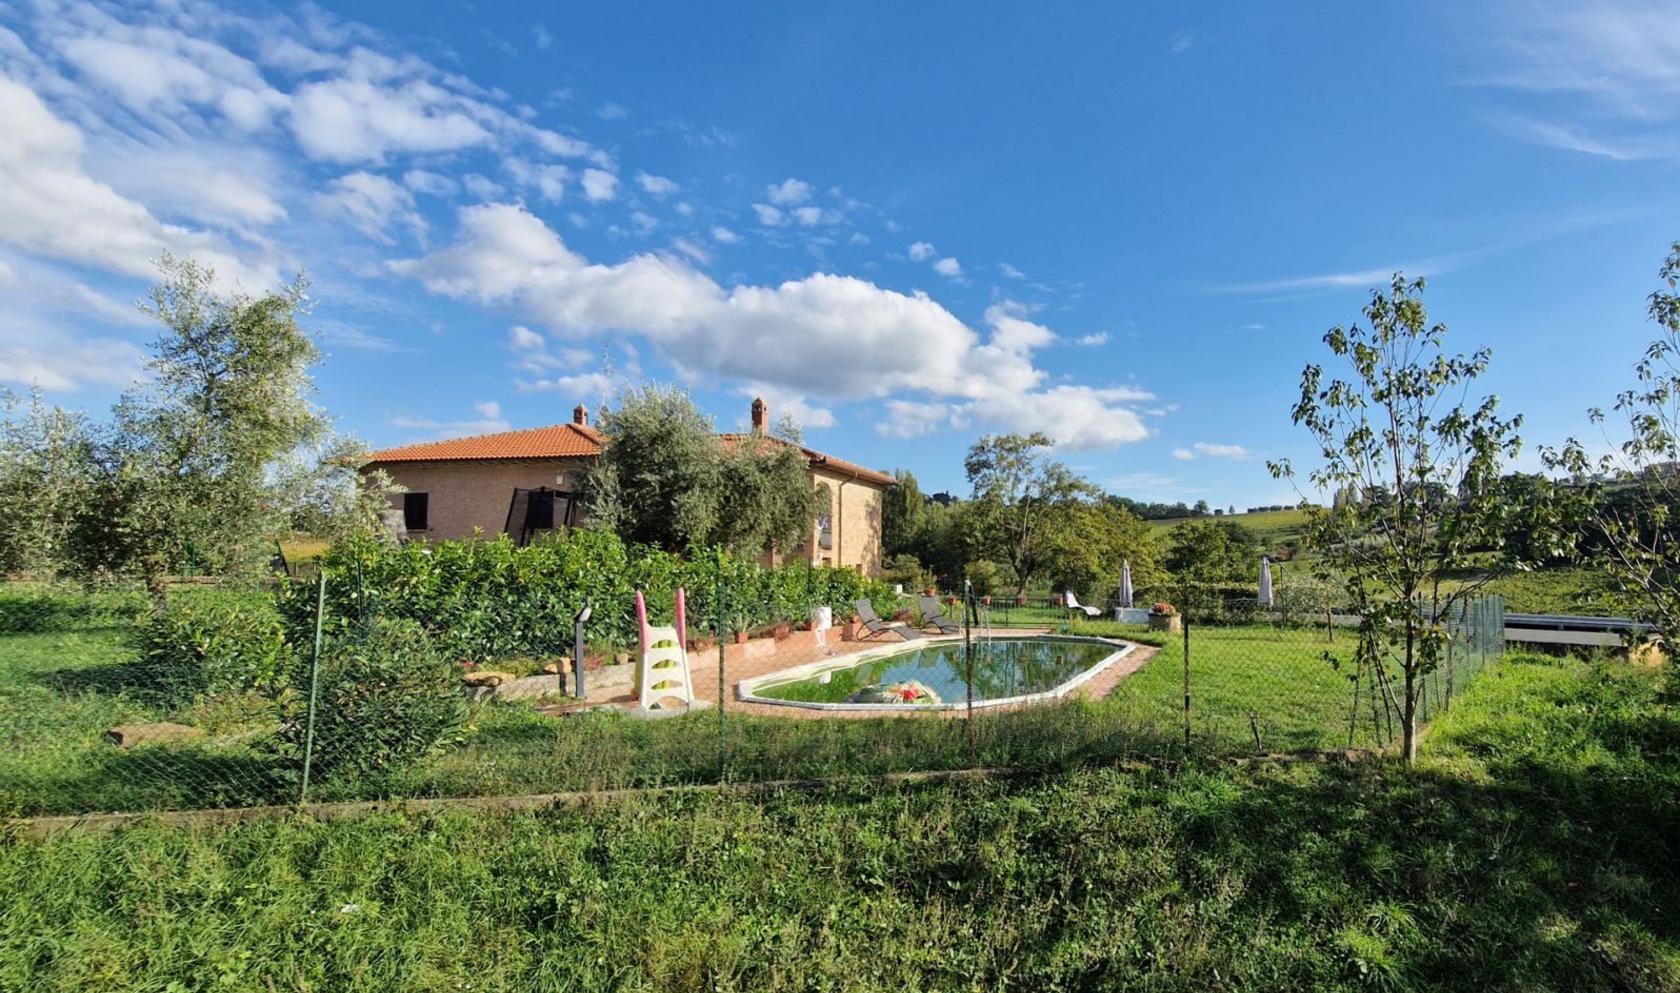 Toscana Immobiliare - On the farmhouse there is a beautiful panoramic swimming pool with views of Montepulciano and the vineyards.